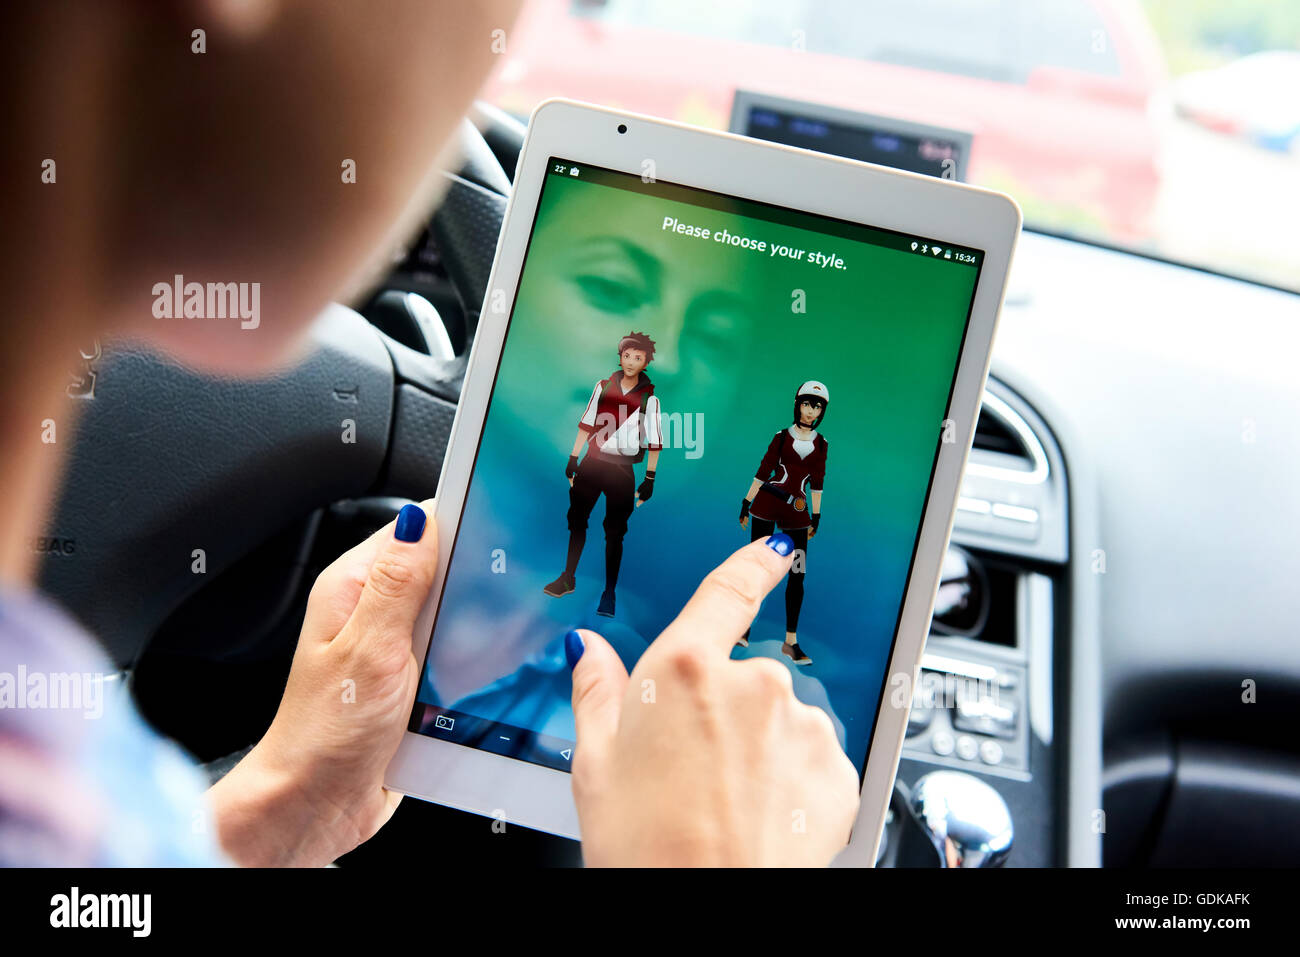 Woman sitting in a car and playing a Pokemon Go game Stock Photo - Alamy